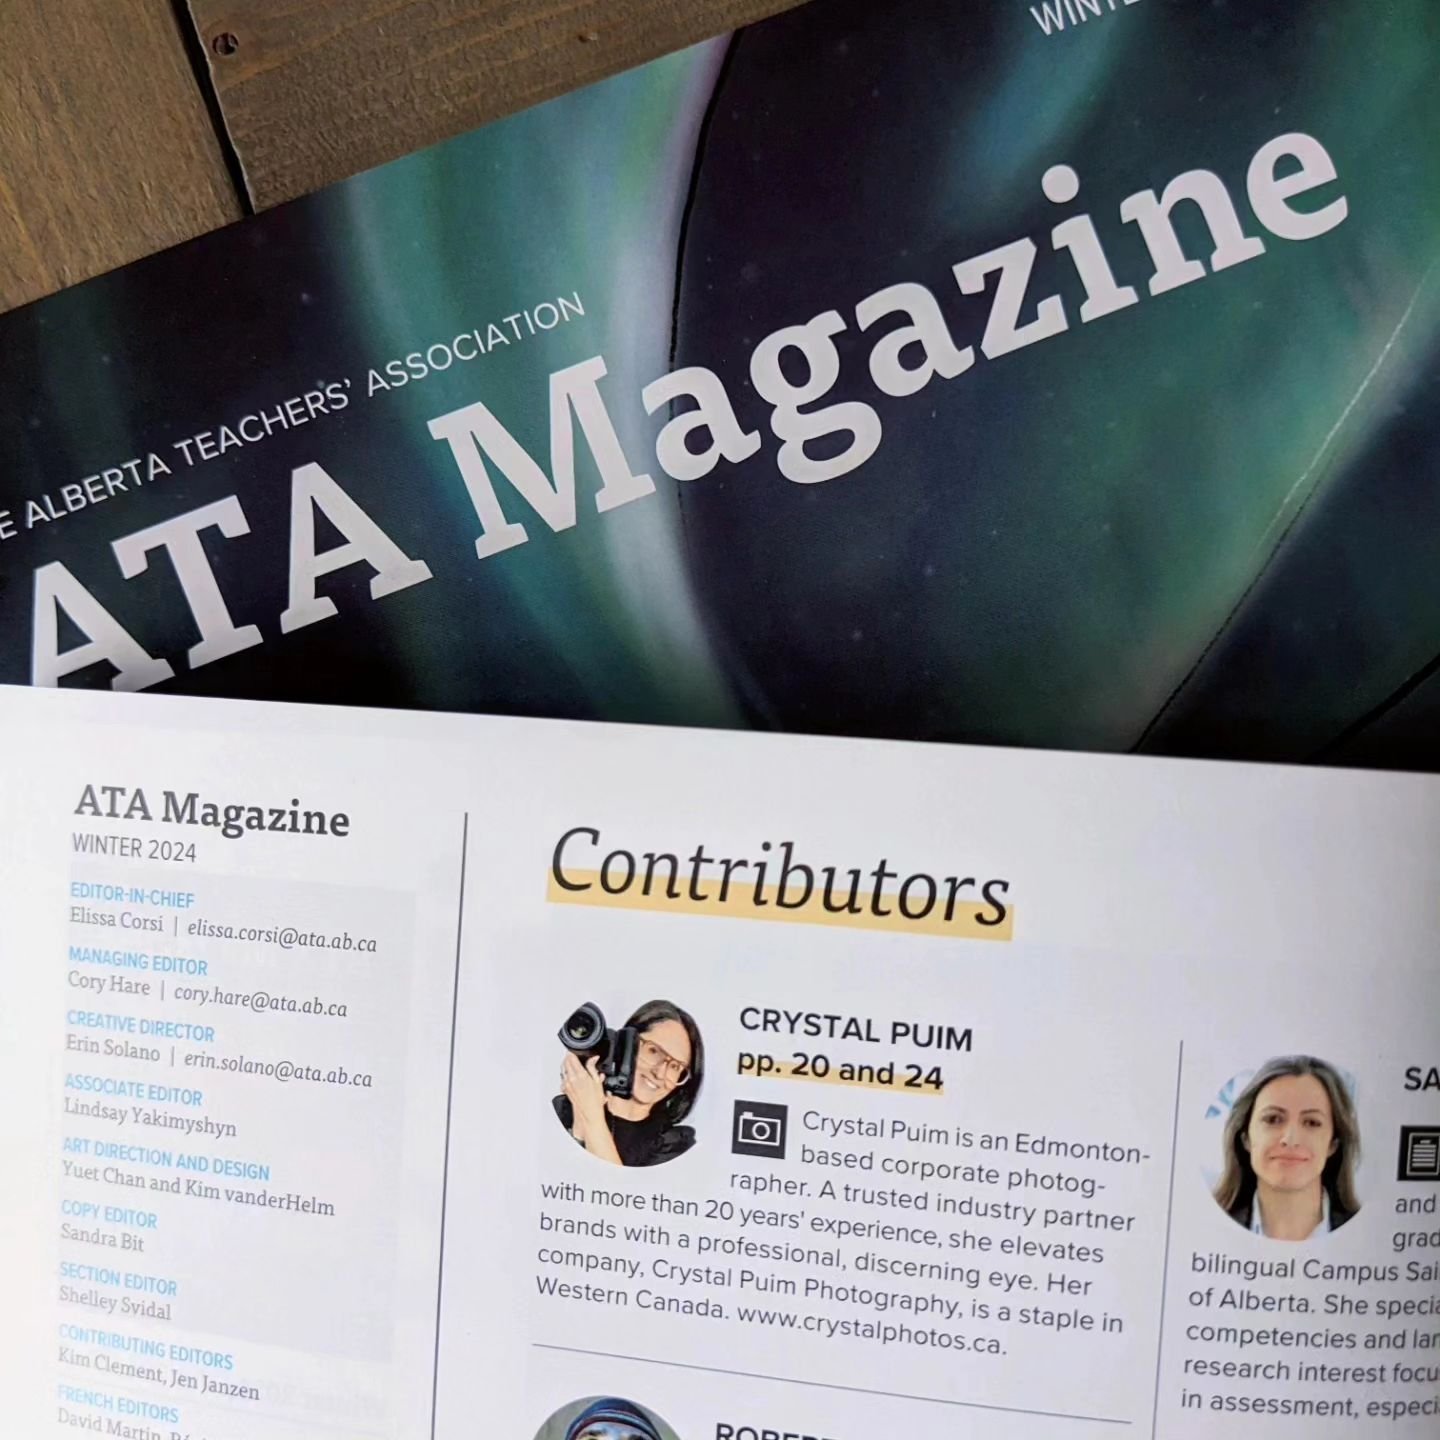 The photos we shot earlier this year for ATA Magazine was such a pleasant experience due to the wonderful people who work for the magazine and the teachers I was fortunate enough to meet. The articles are fantastic and I'm proud to have had a small c